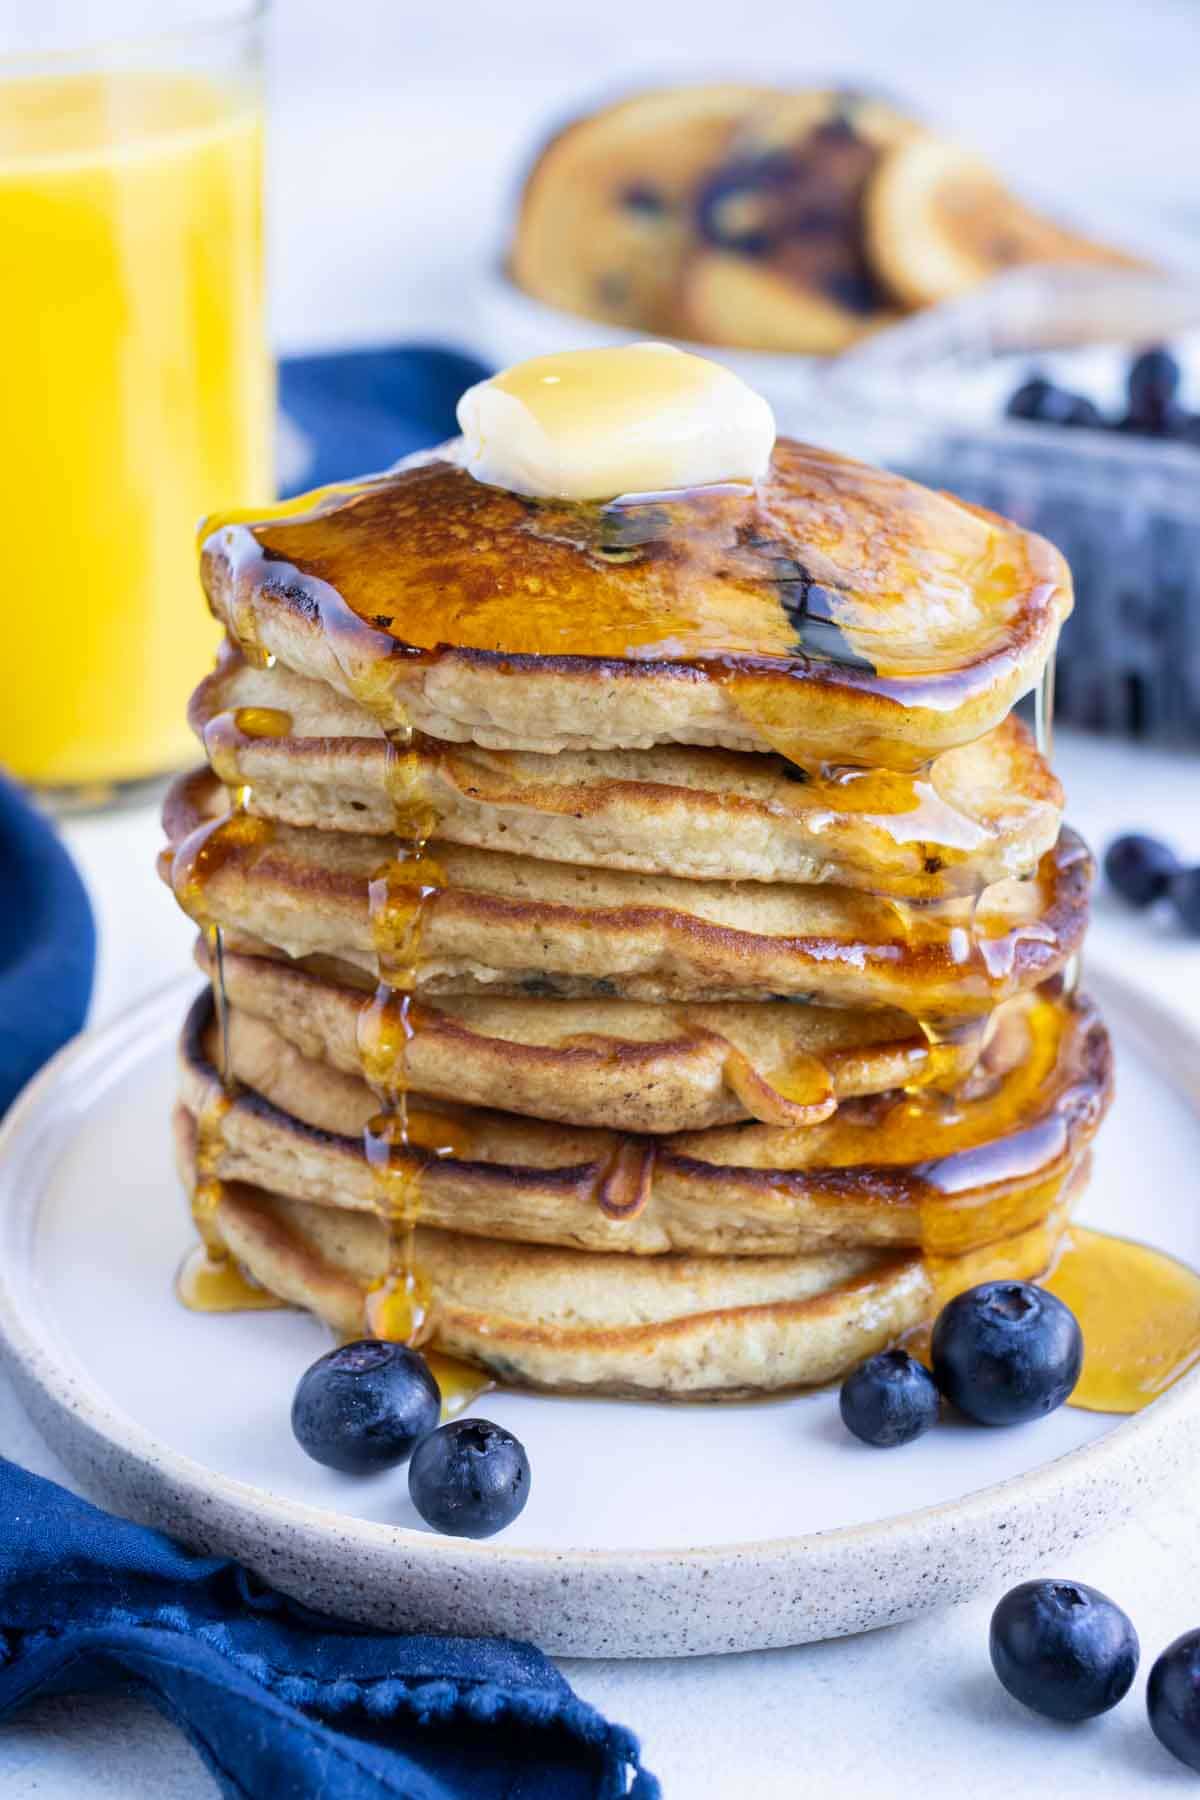 Butter and syrup are served on top of the blueberry pancakes.